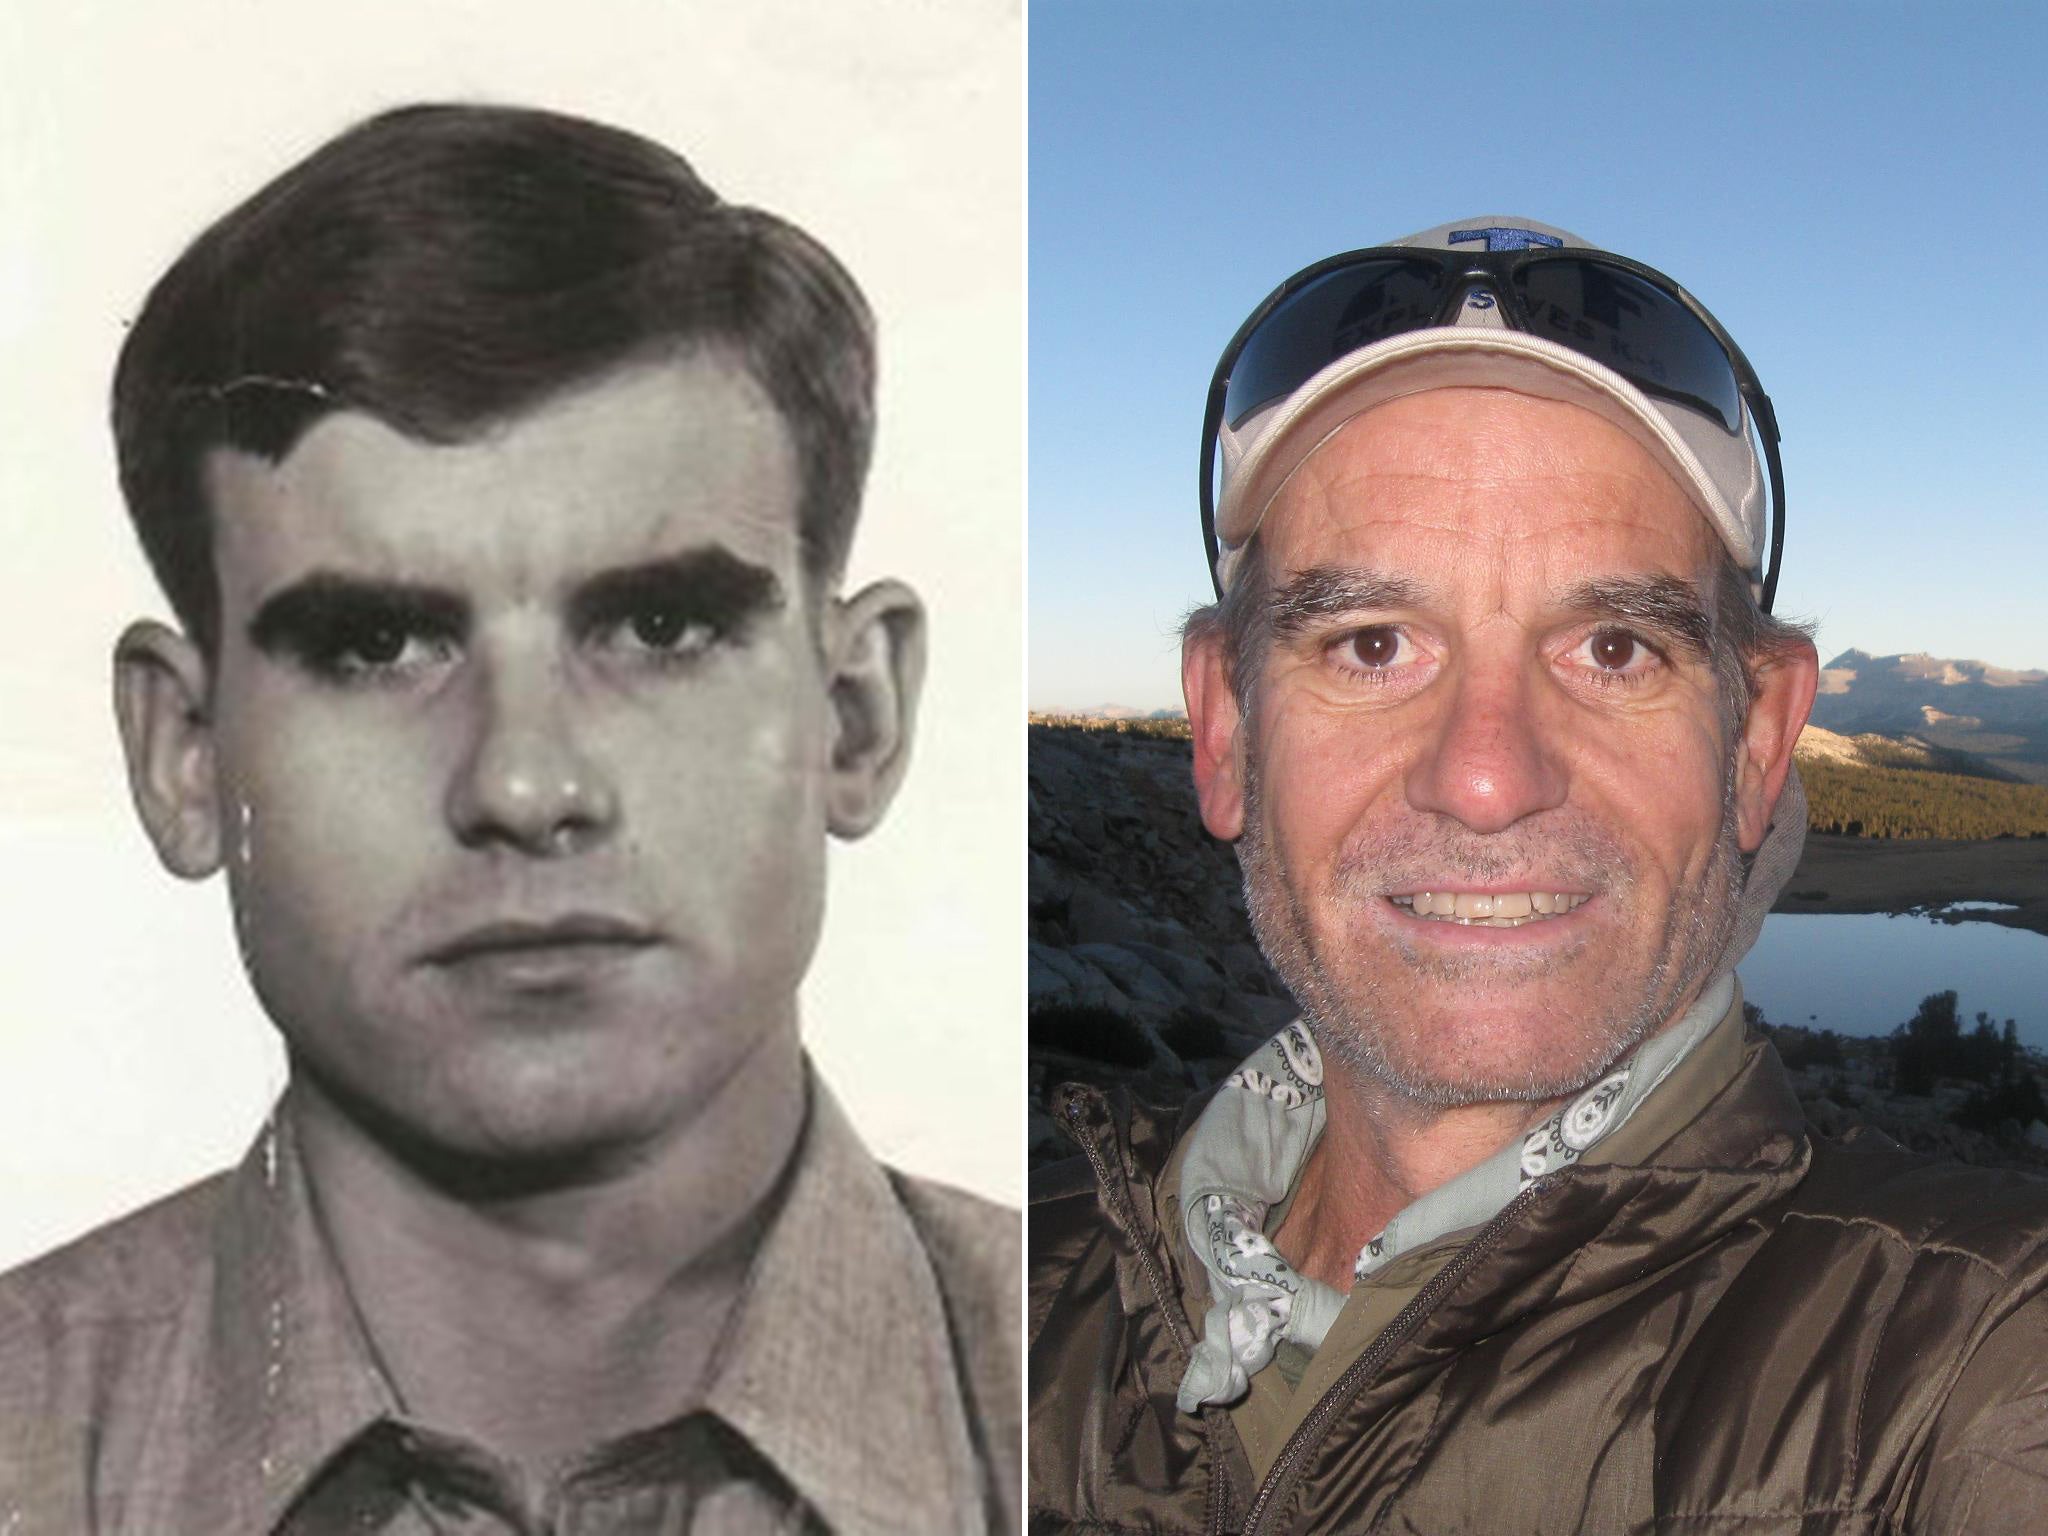 Ken Crouse photographed in 1975 and 2012